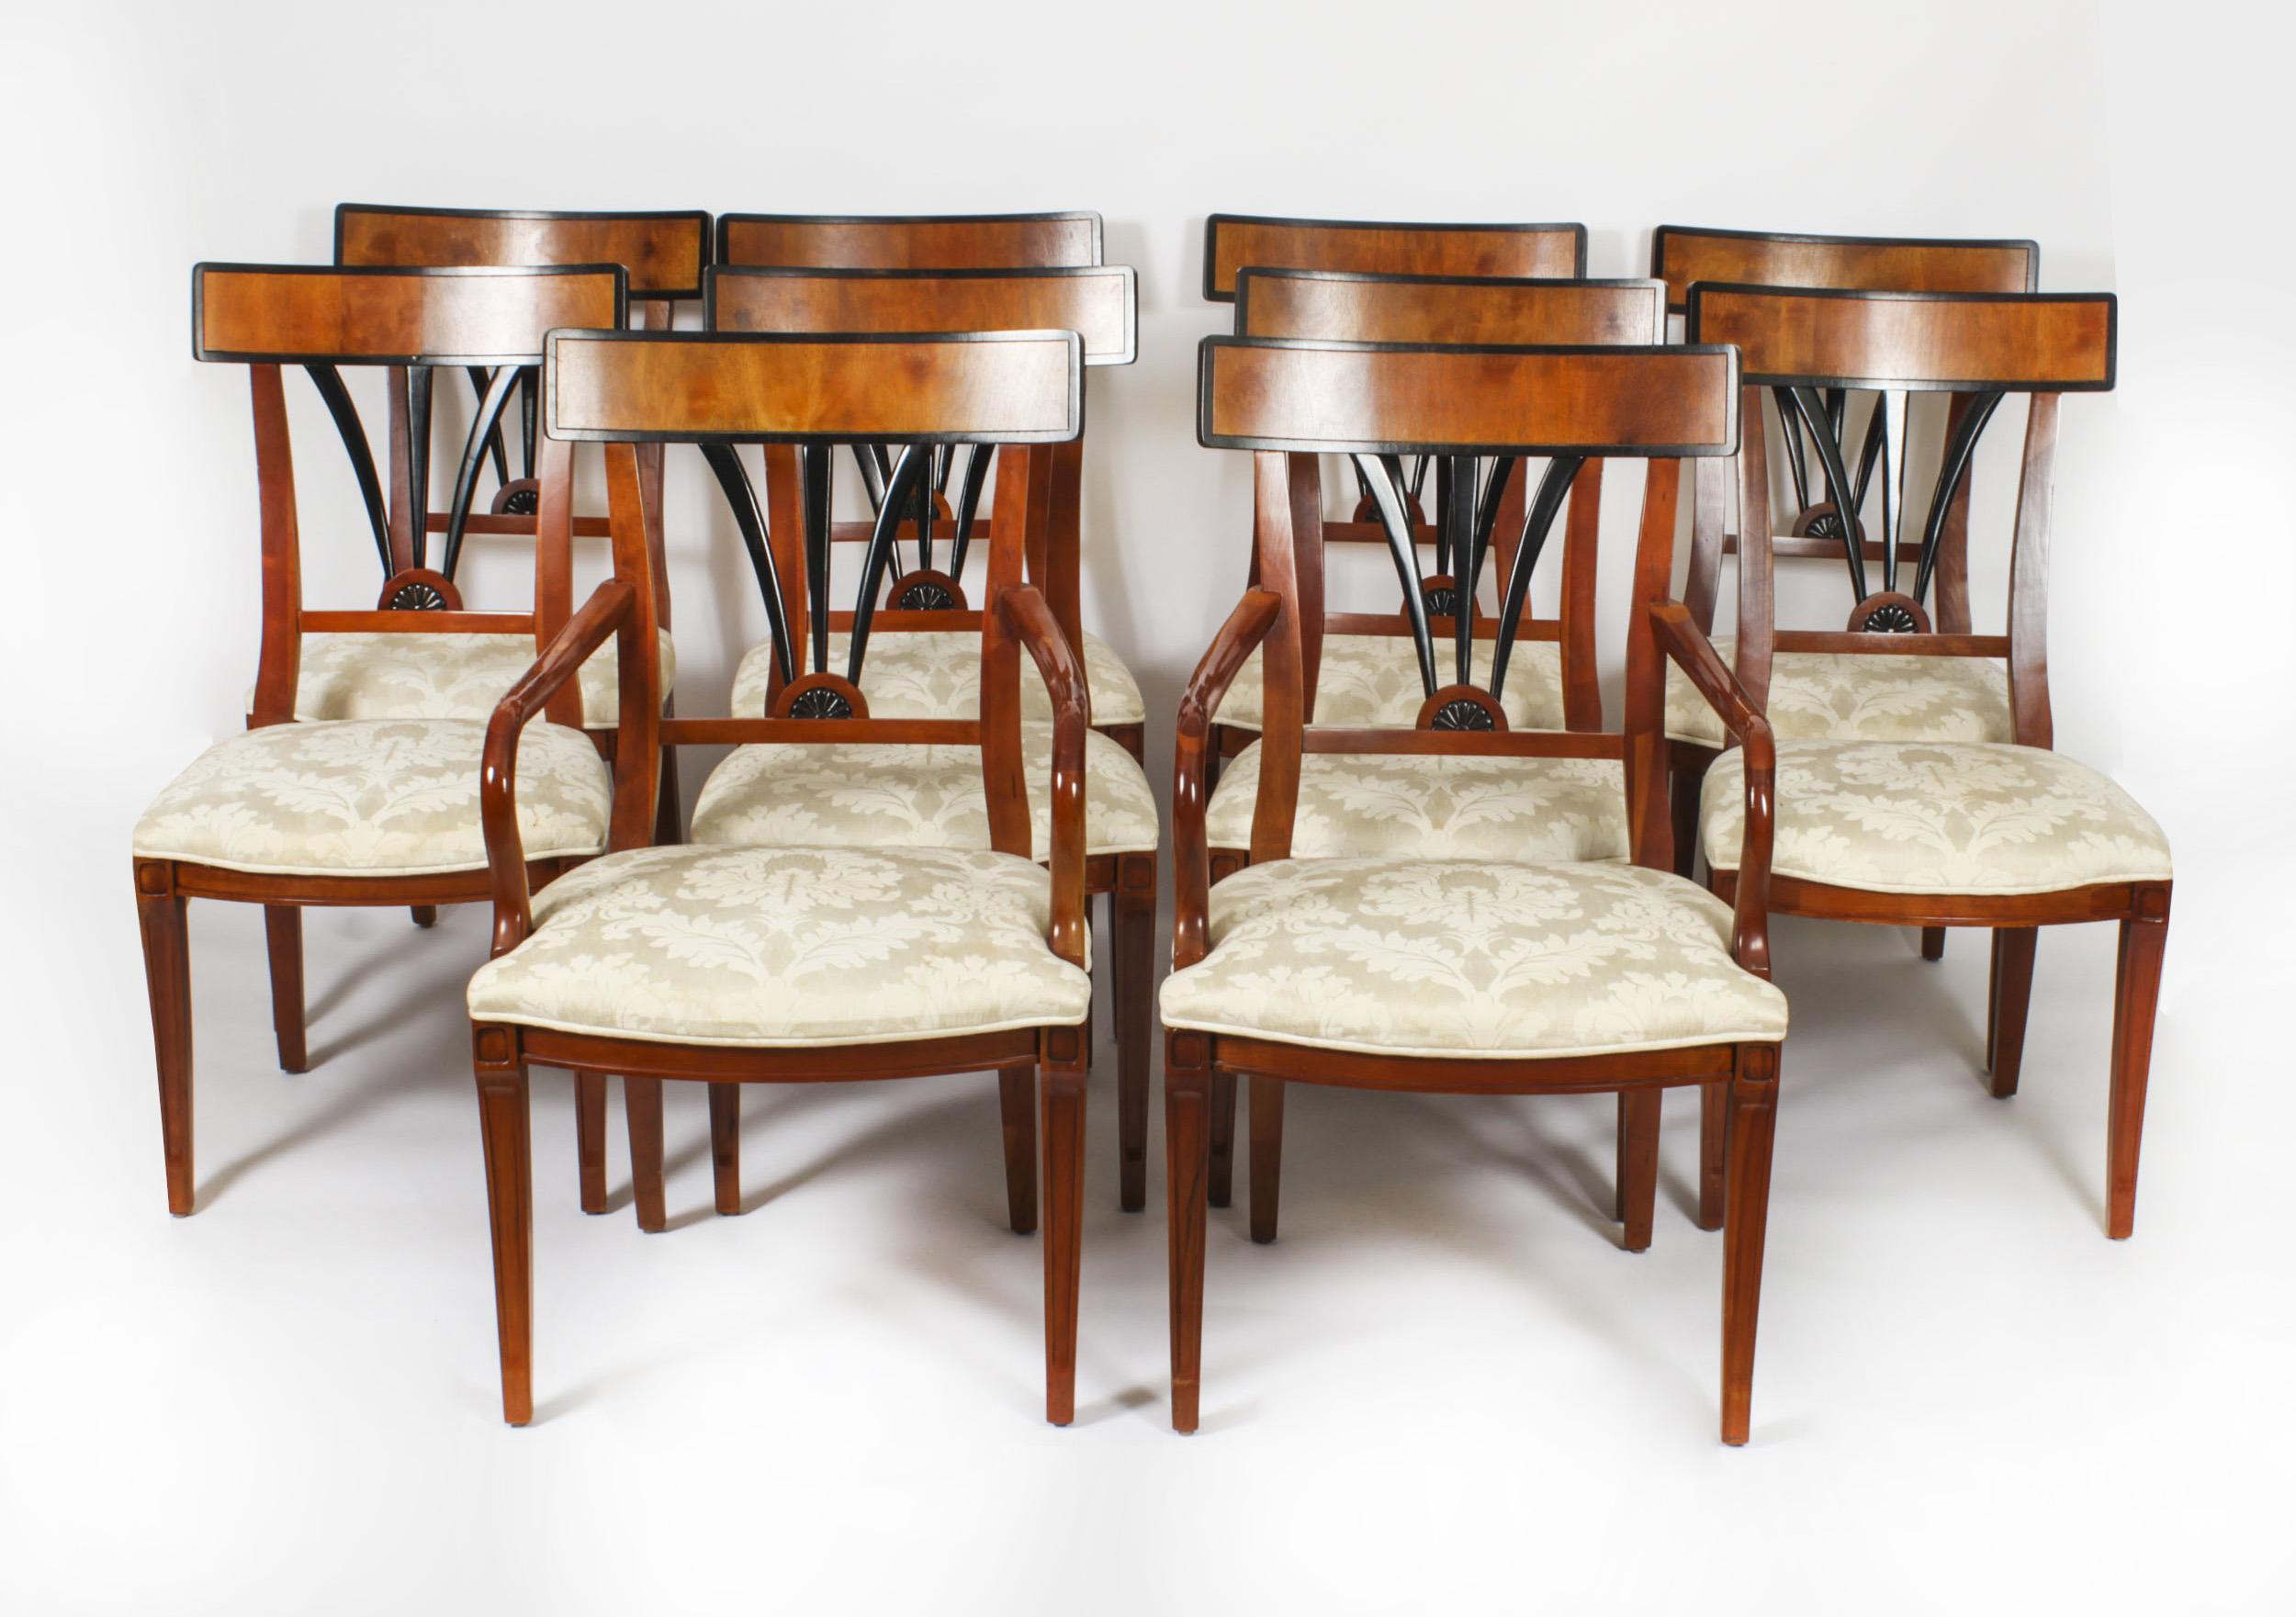 Vintage Harrods Biedermeier Dining Table & 10 Dining Chairs 20th Century 5